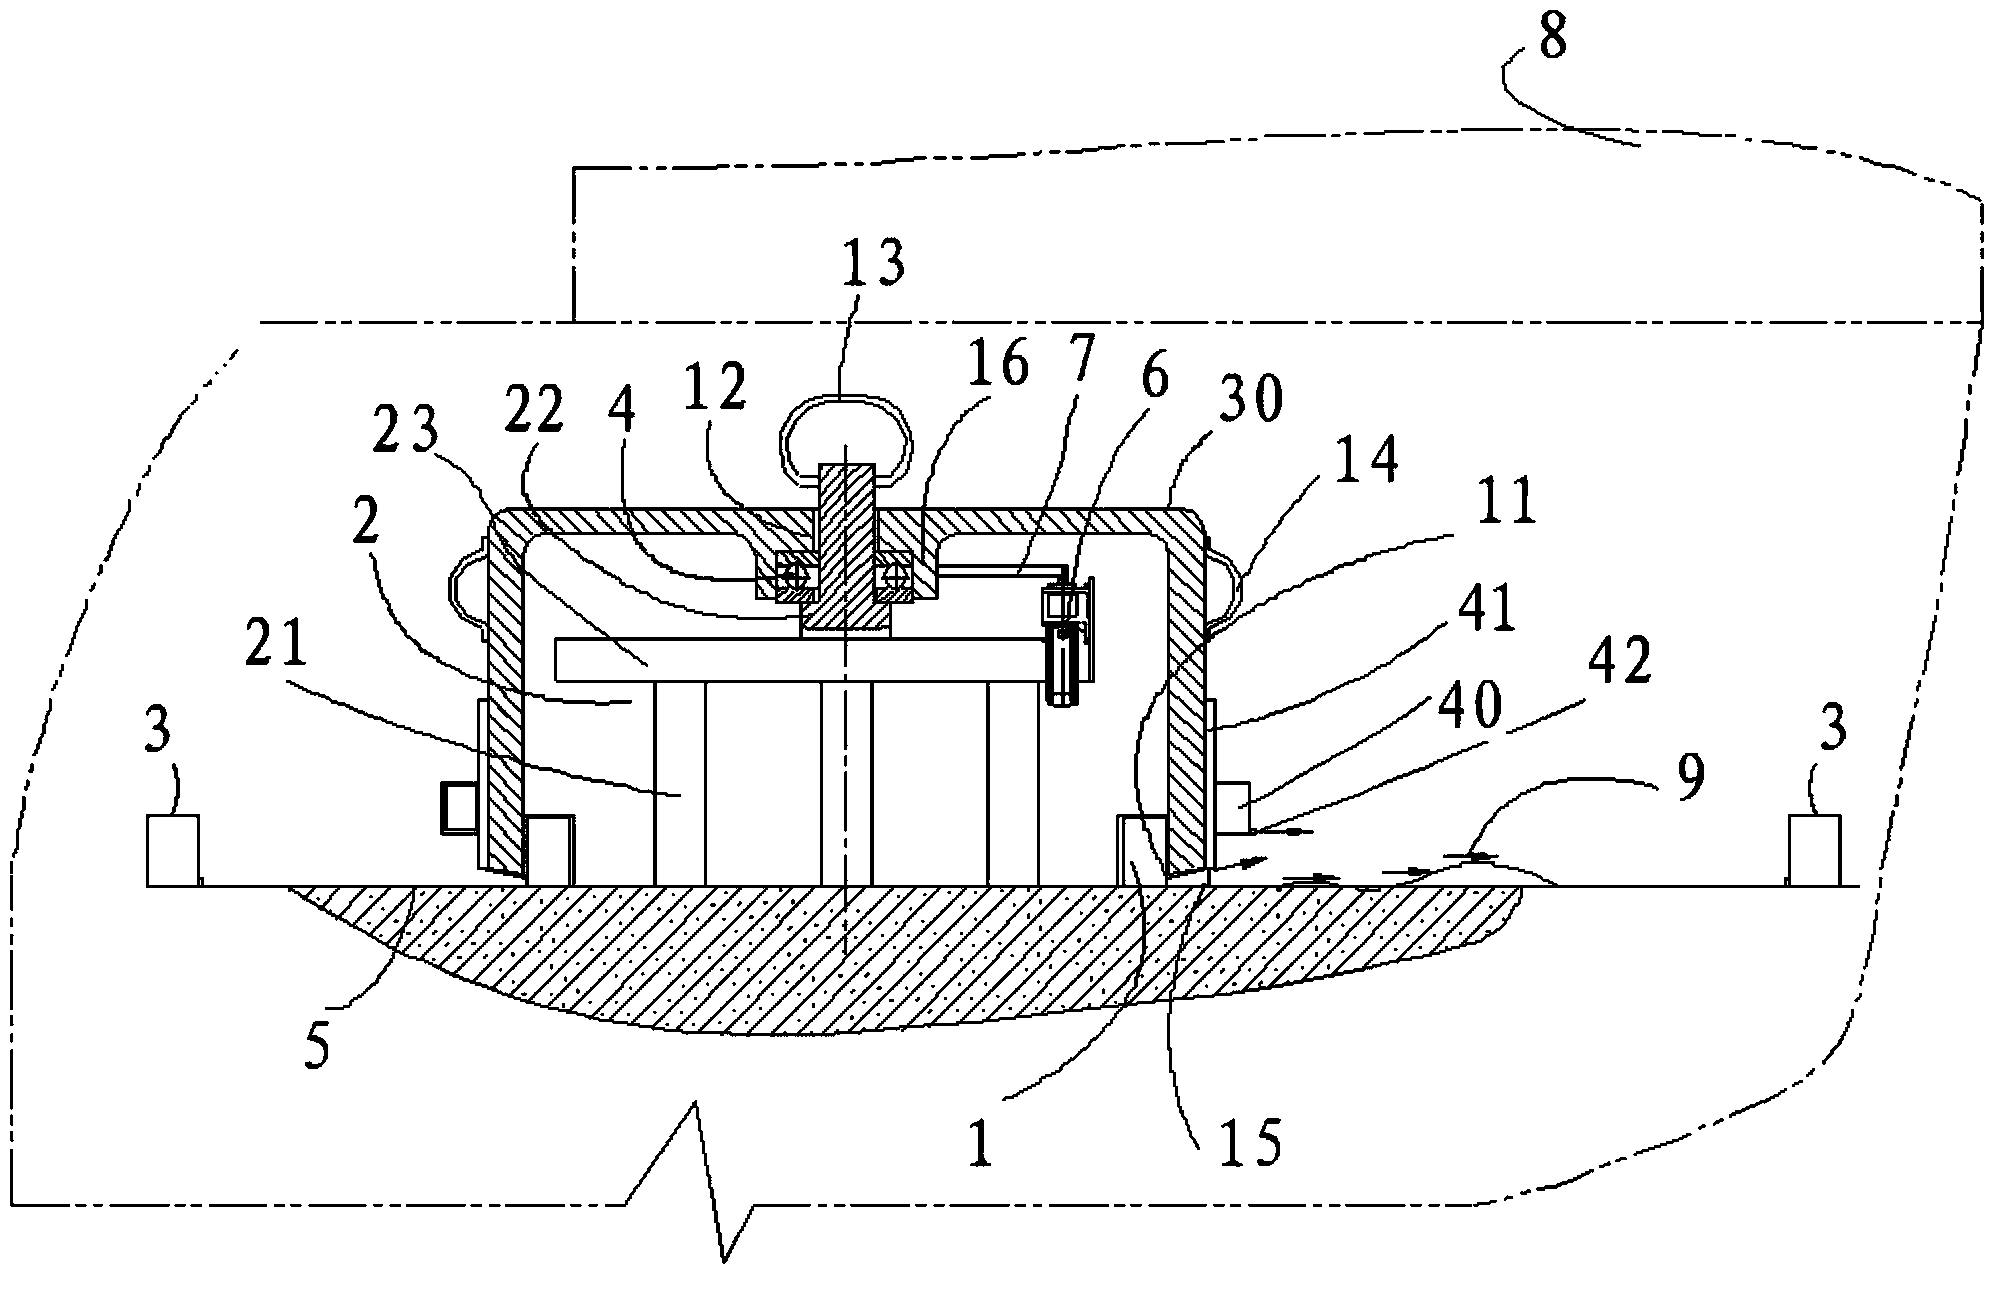 Device for measuring wall or ground flatness by lasers